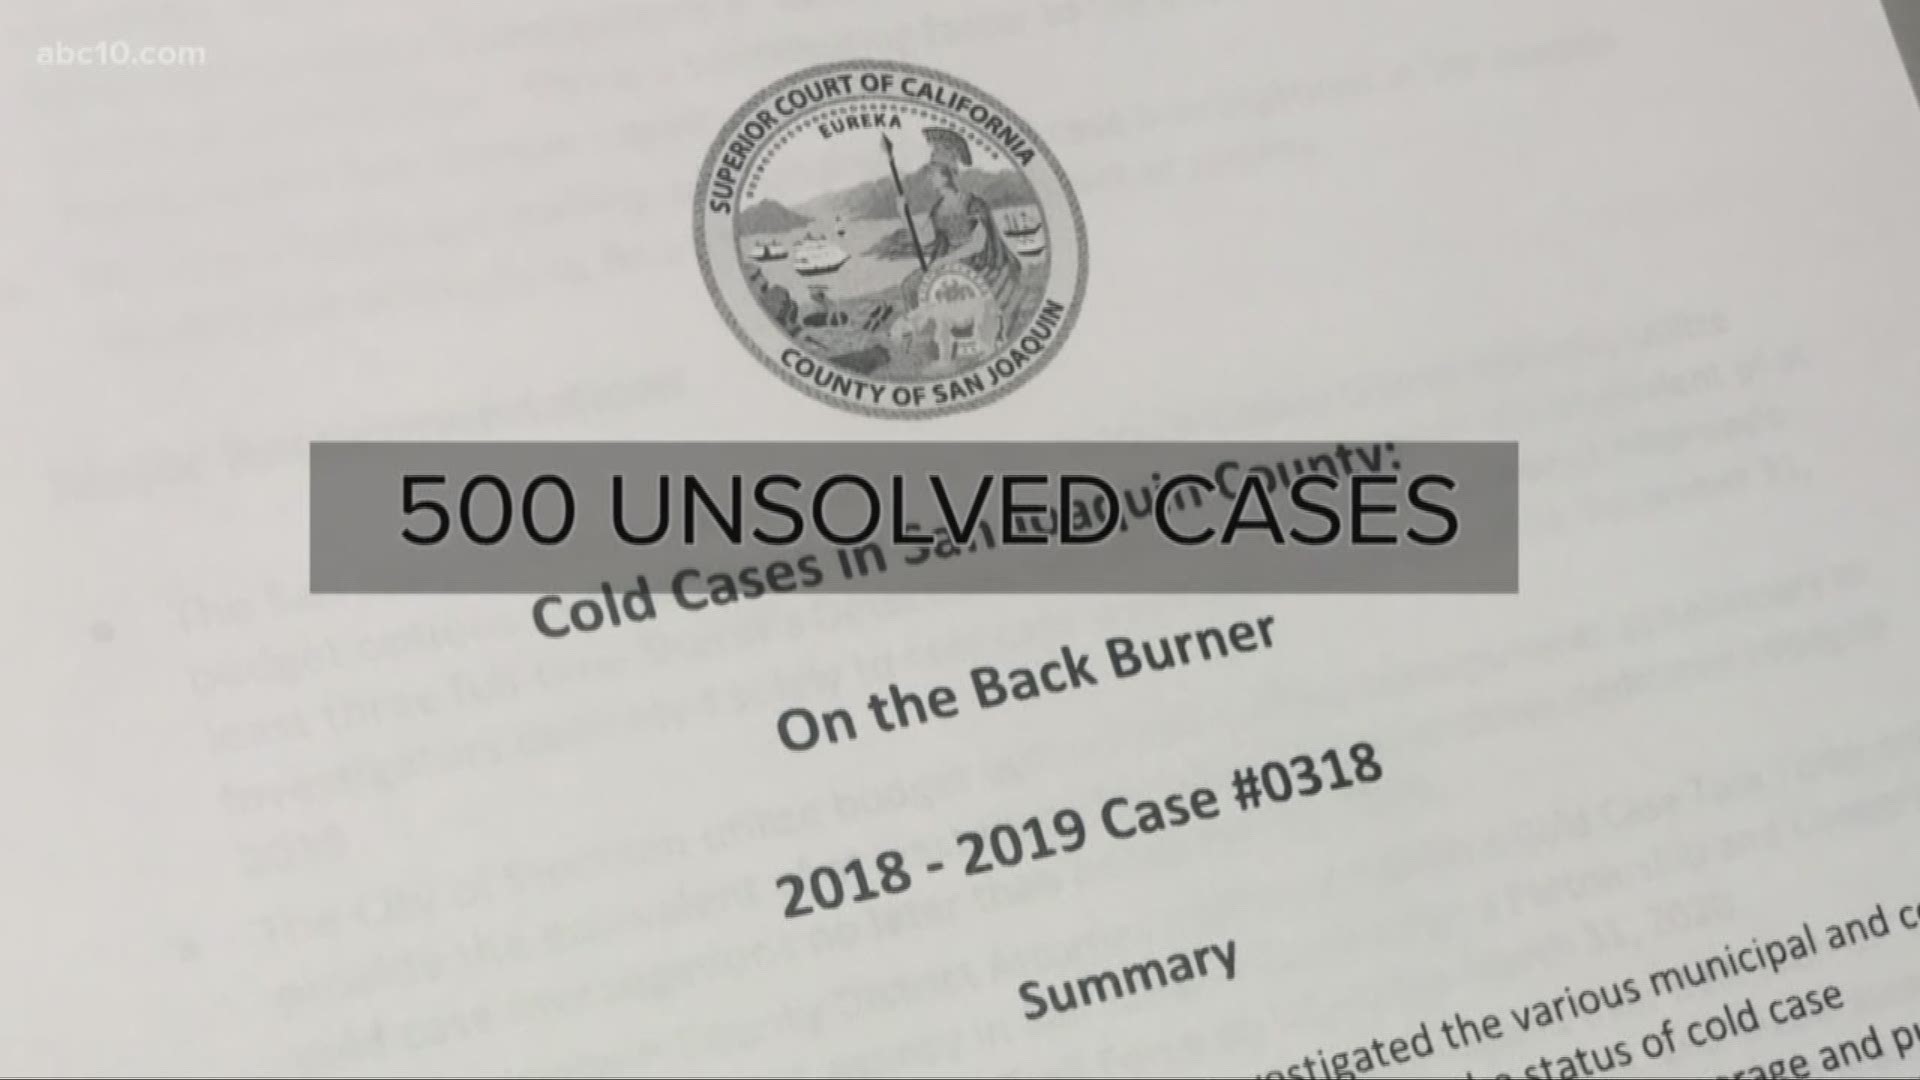 The San Joaquin County Grand Jury is making recommendations for more detectives and cold case task force to help with the counties more than 500 unsolved murders.